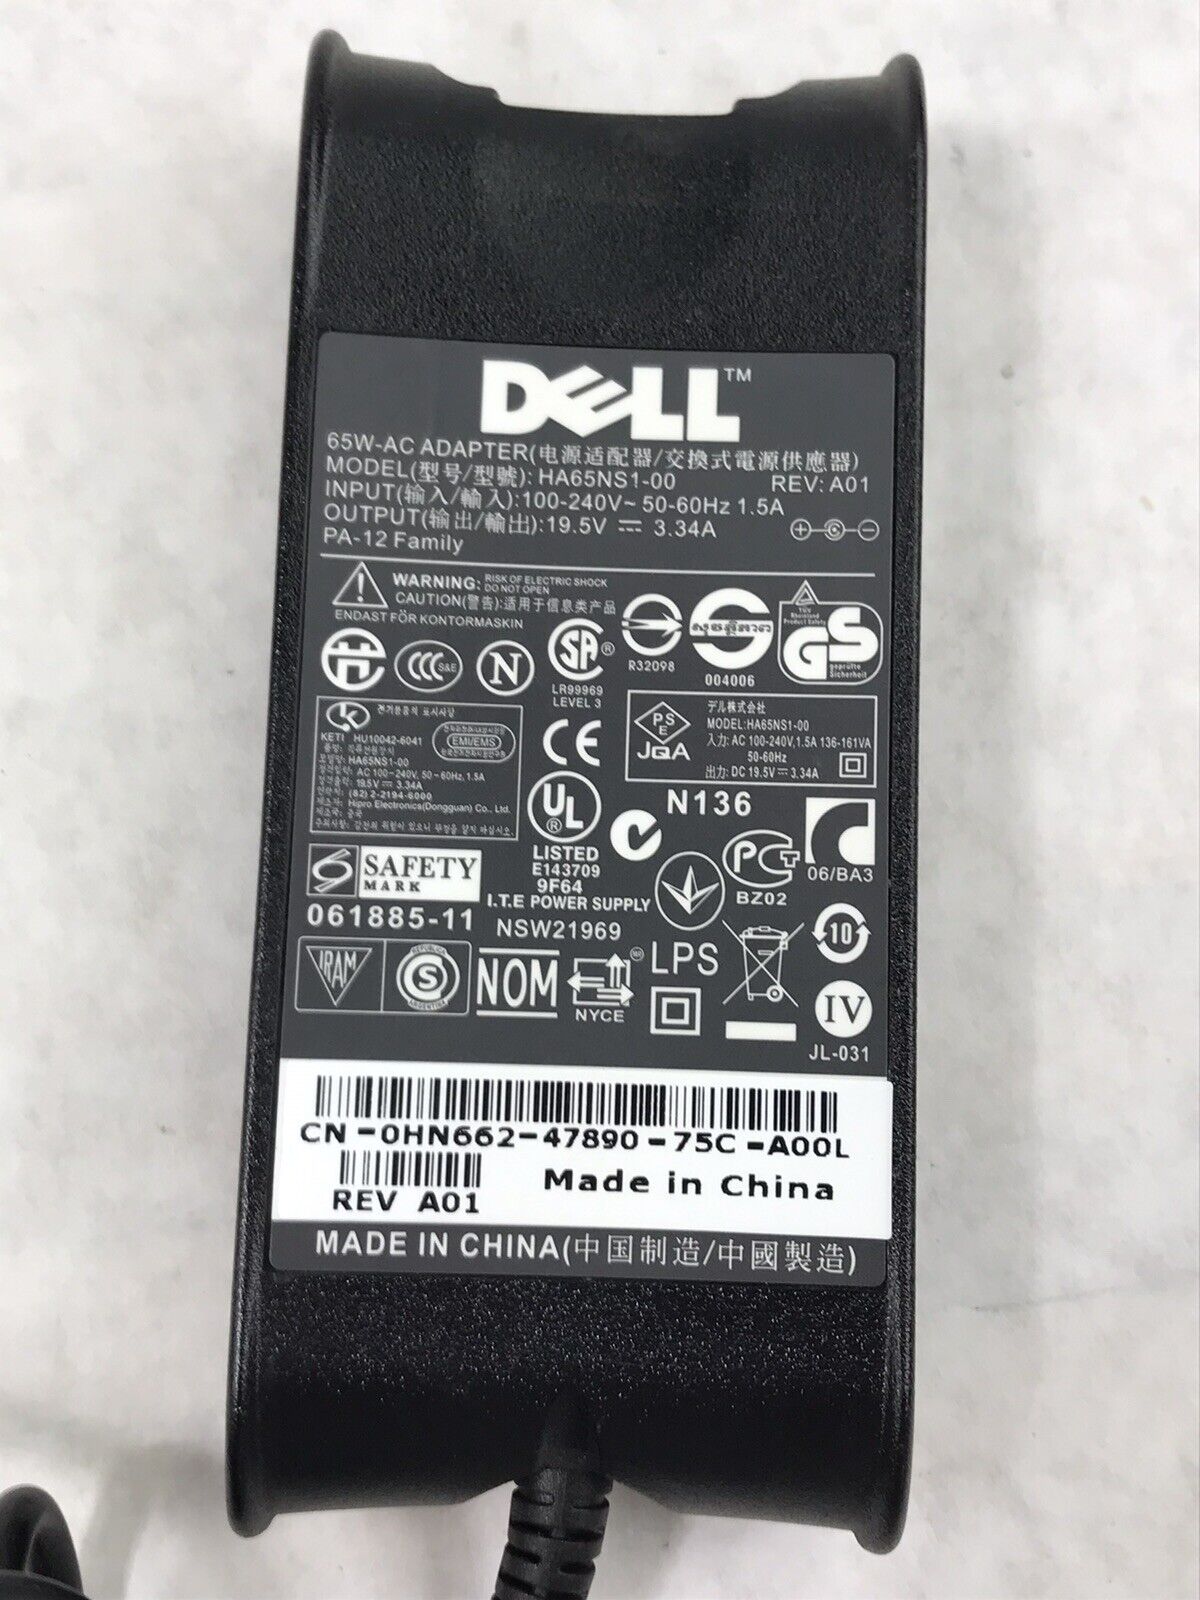 Genuine OEM Dell HA65SN1-00 Laptop Charger AC Adapter Power Supply PA-12 65W